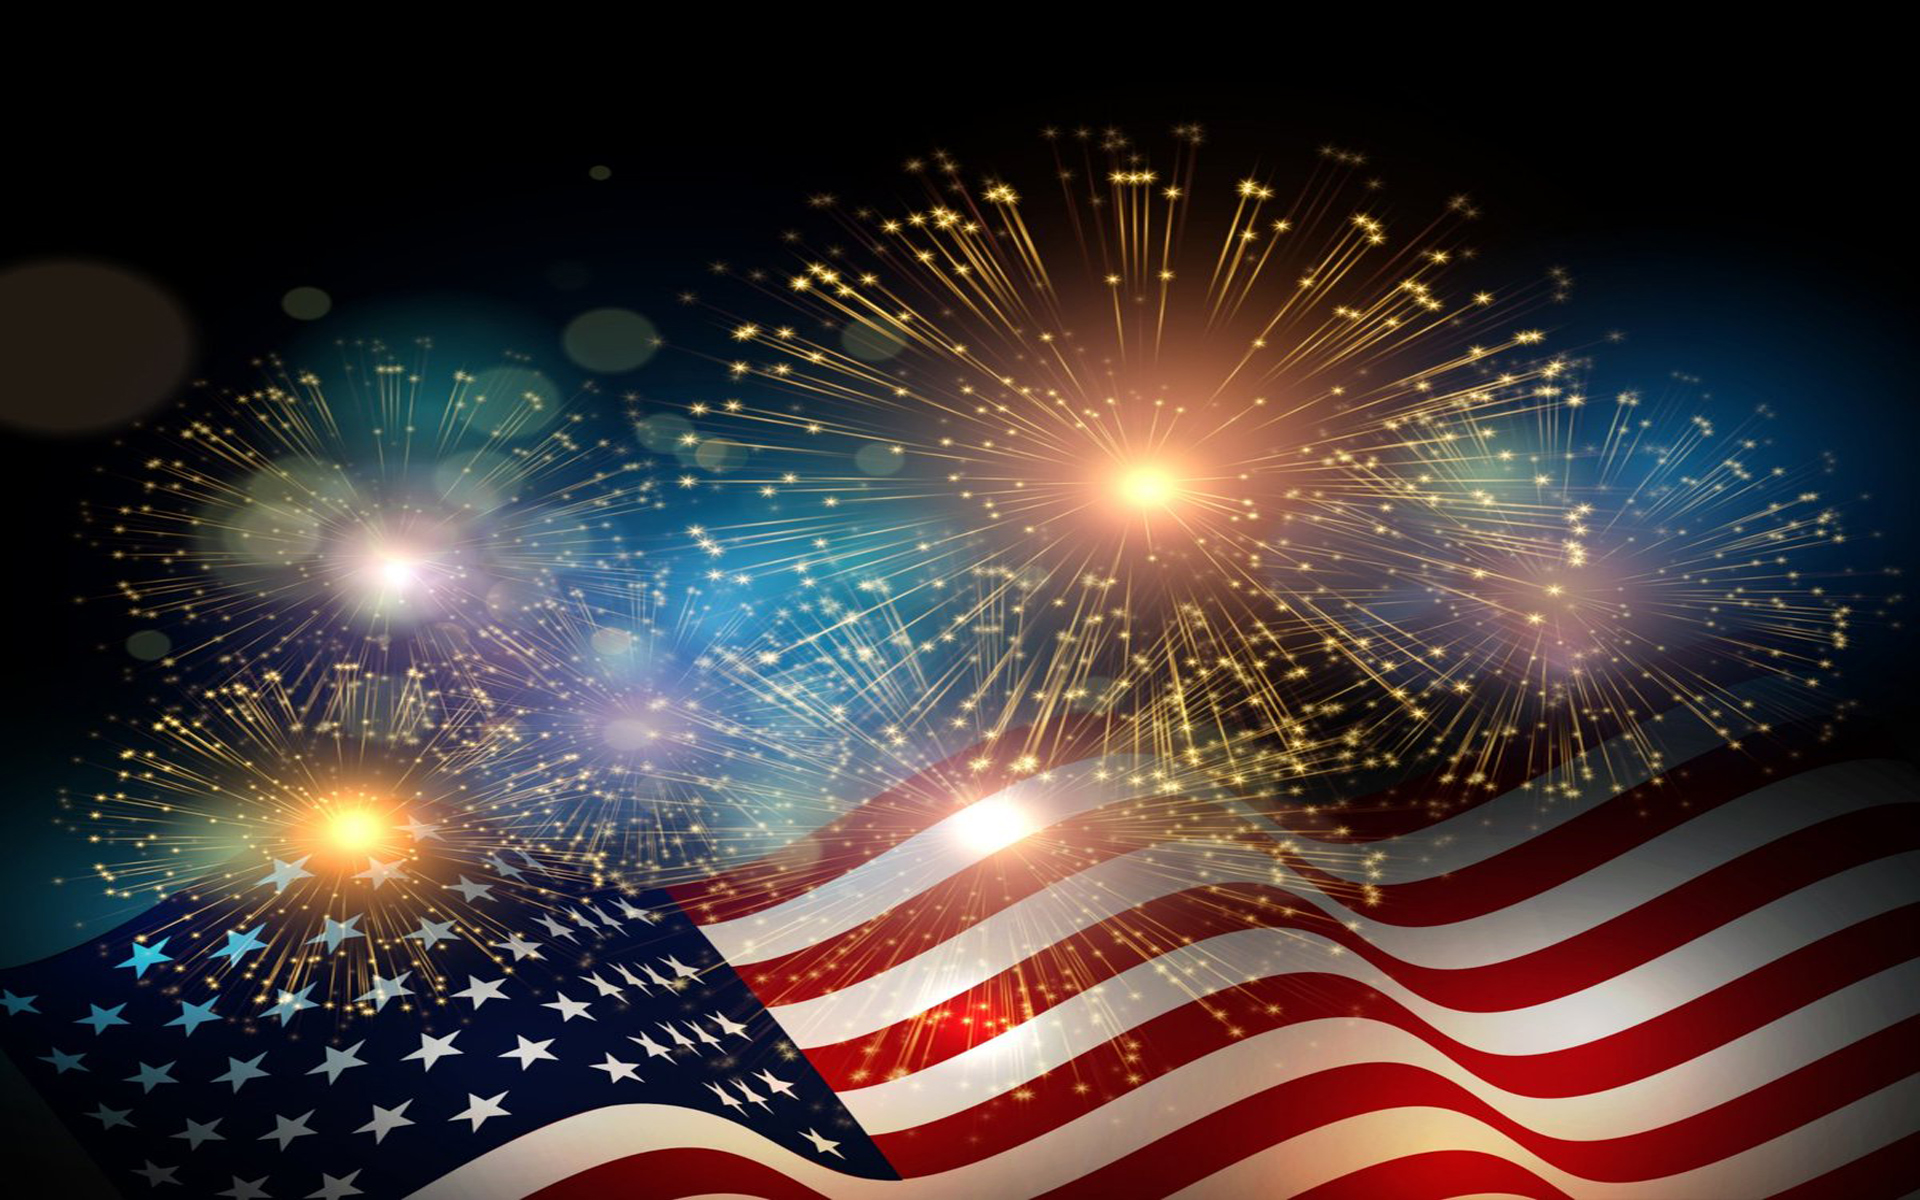 American Flag Fireworks Independence Day Celebrations 4 July Wallpaper Hd  1920x1200 : 